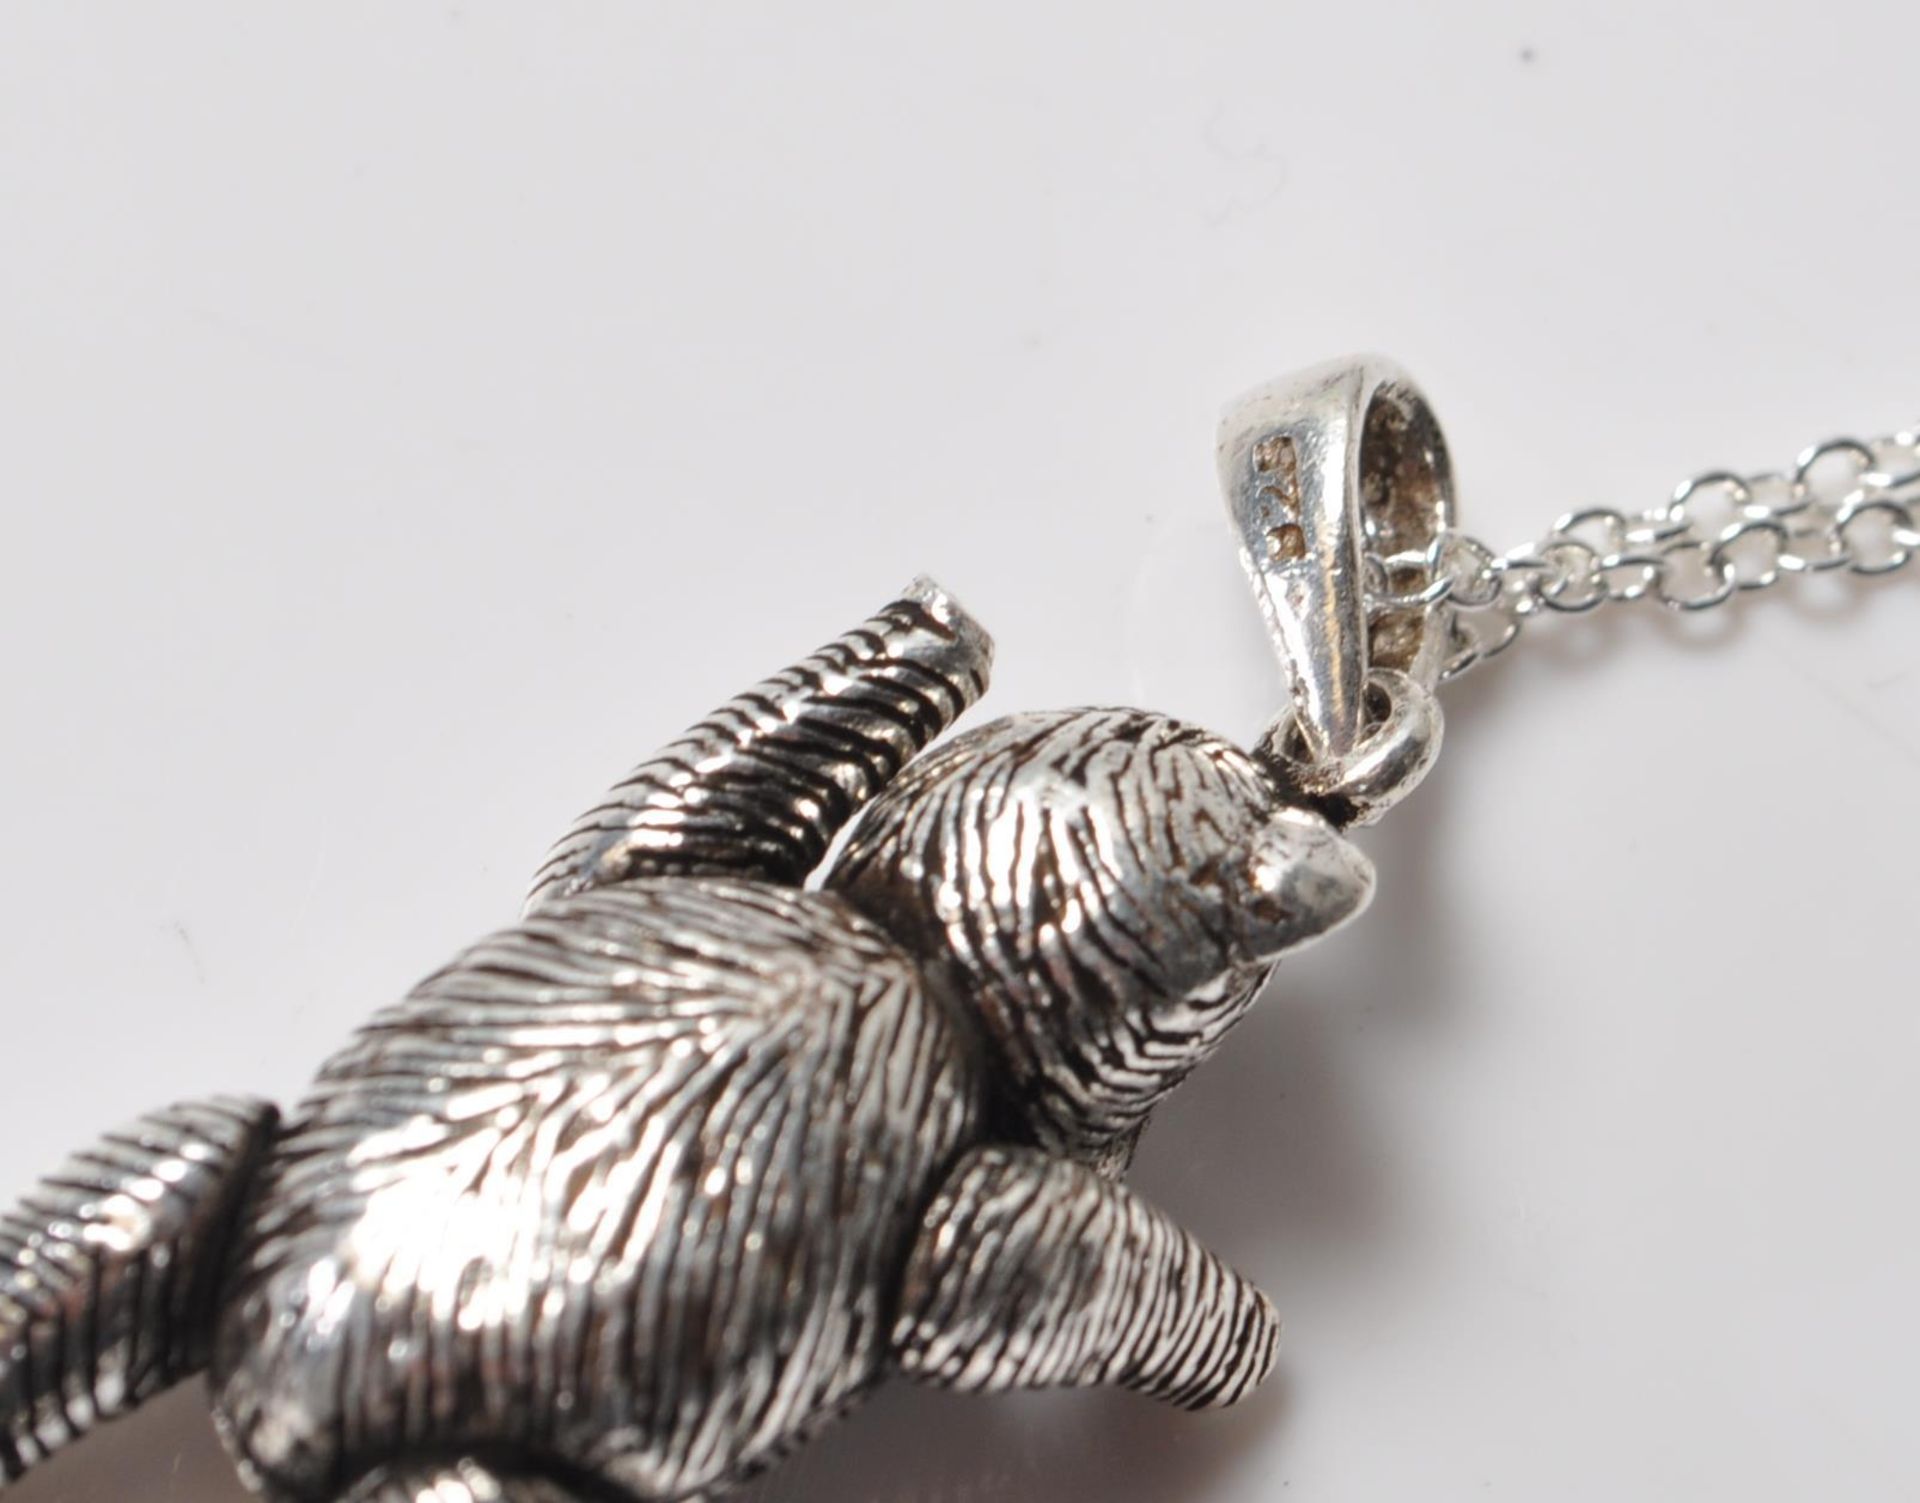 STAMPED 925 SILVER TEDDYBEAR PENDANT NECKLACE. - Image 7 of 8